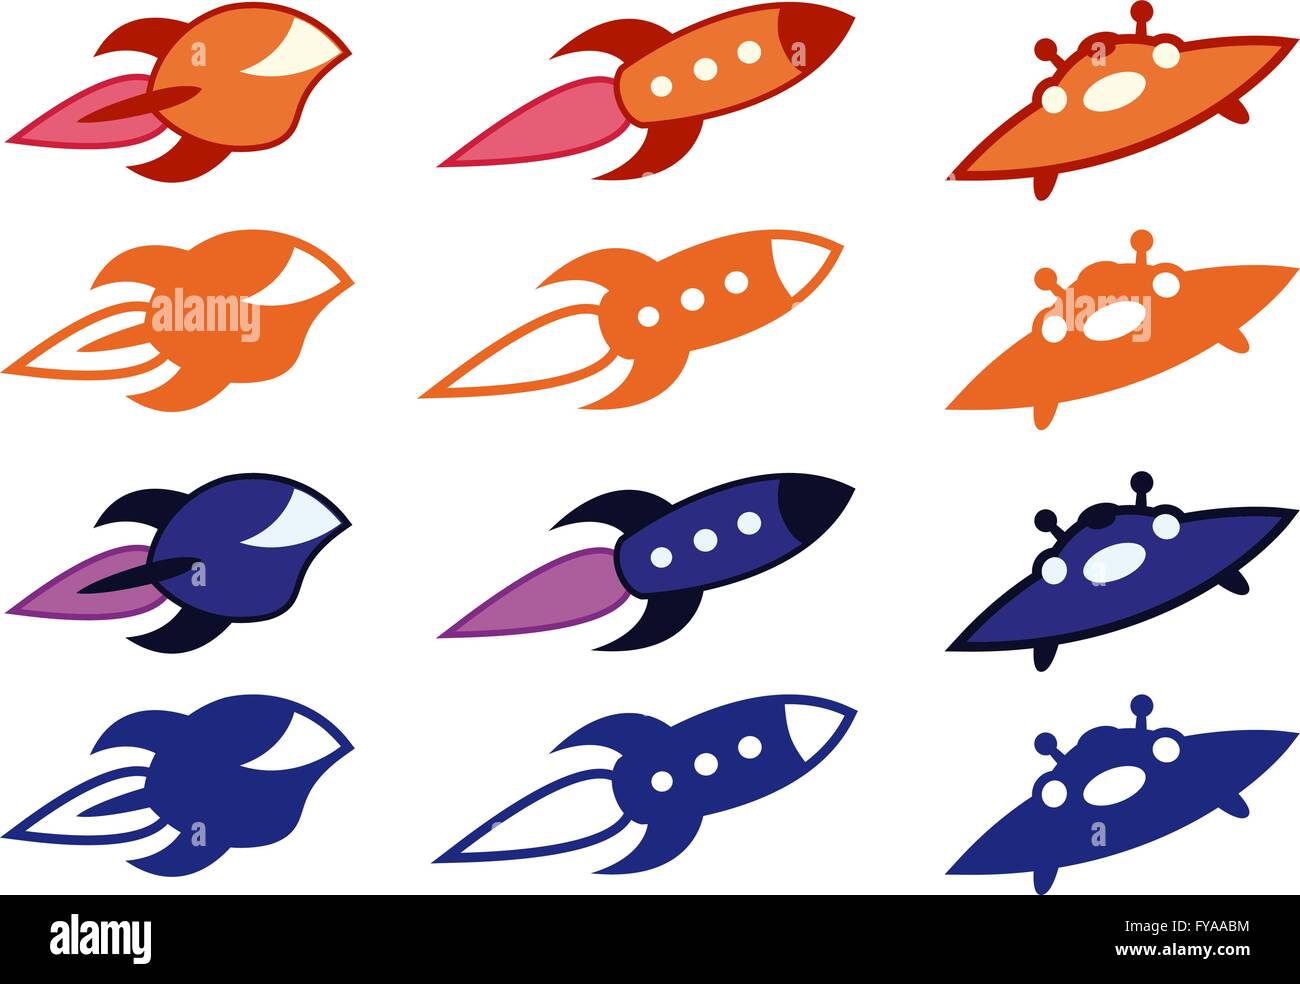 Cartoon vector spaceships, rockets and ufos icon set design. Graphic resources to improve your artwork with high-quality icons Stock Vector